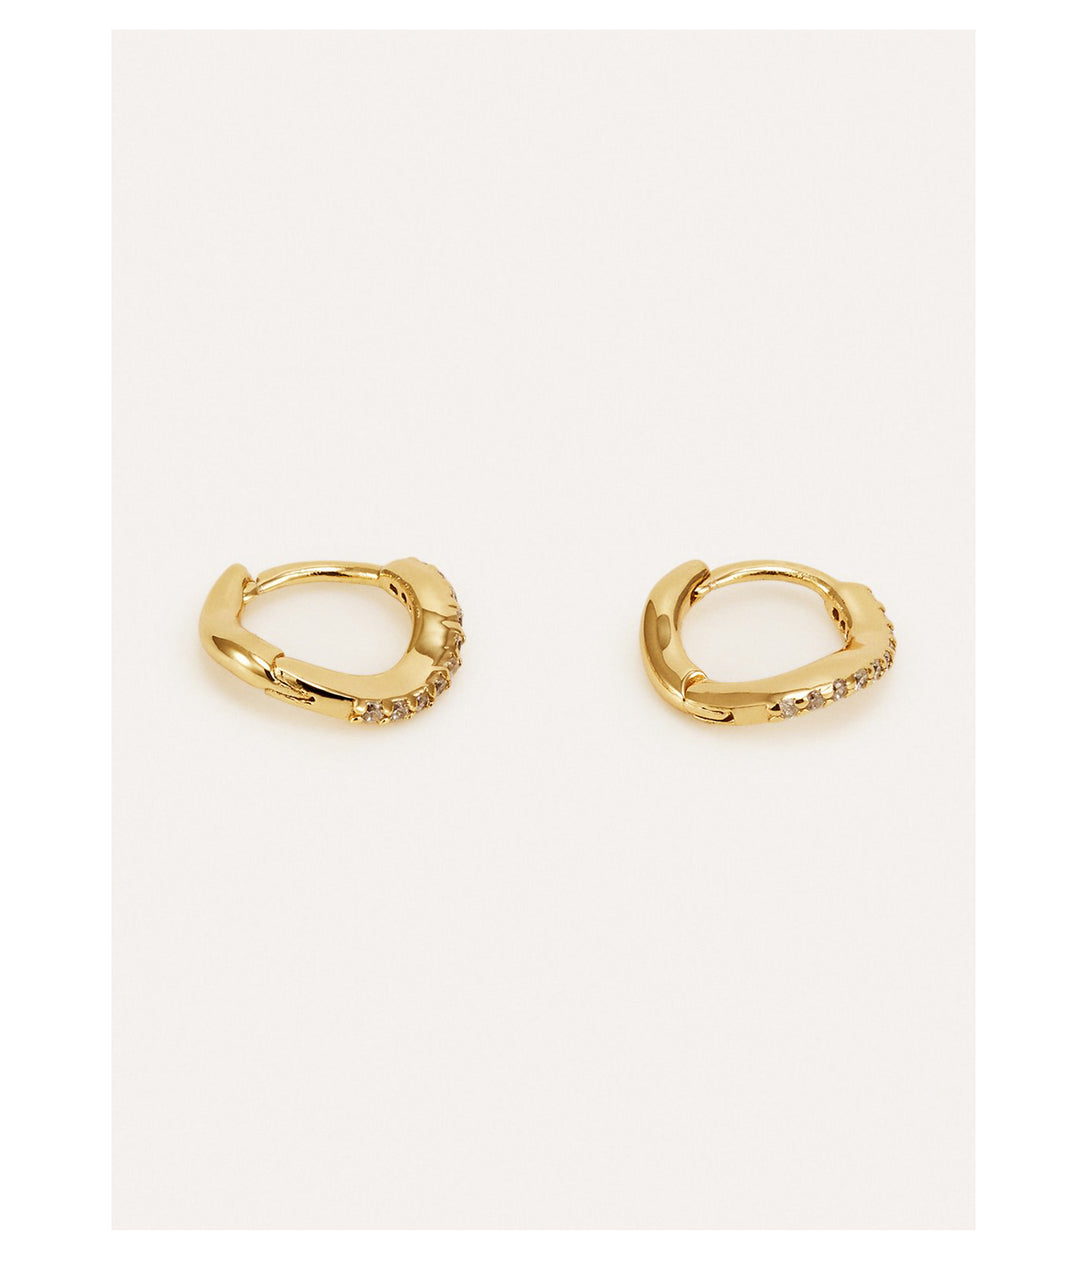 18K Gold-plated Sterling Silver Earrings With A Niche Design